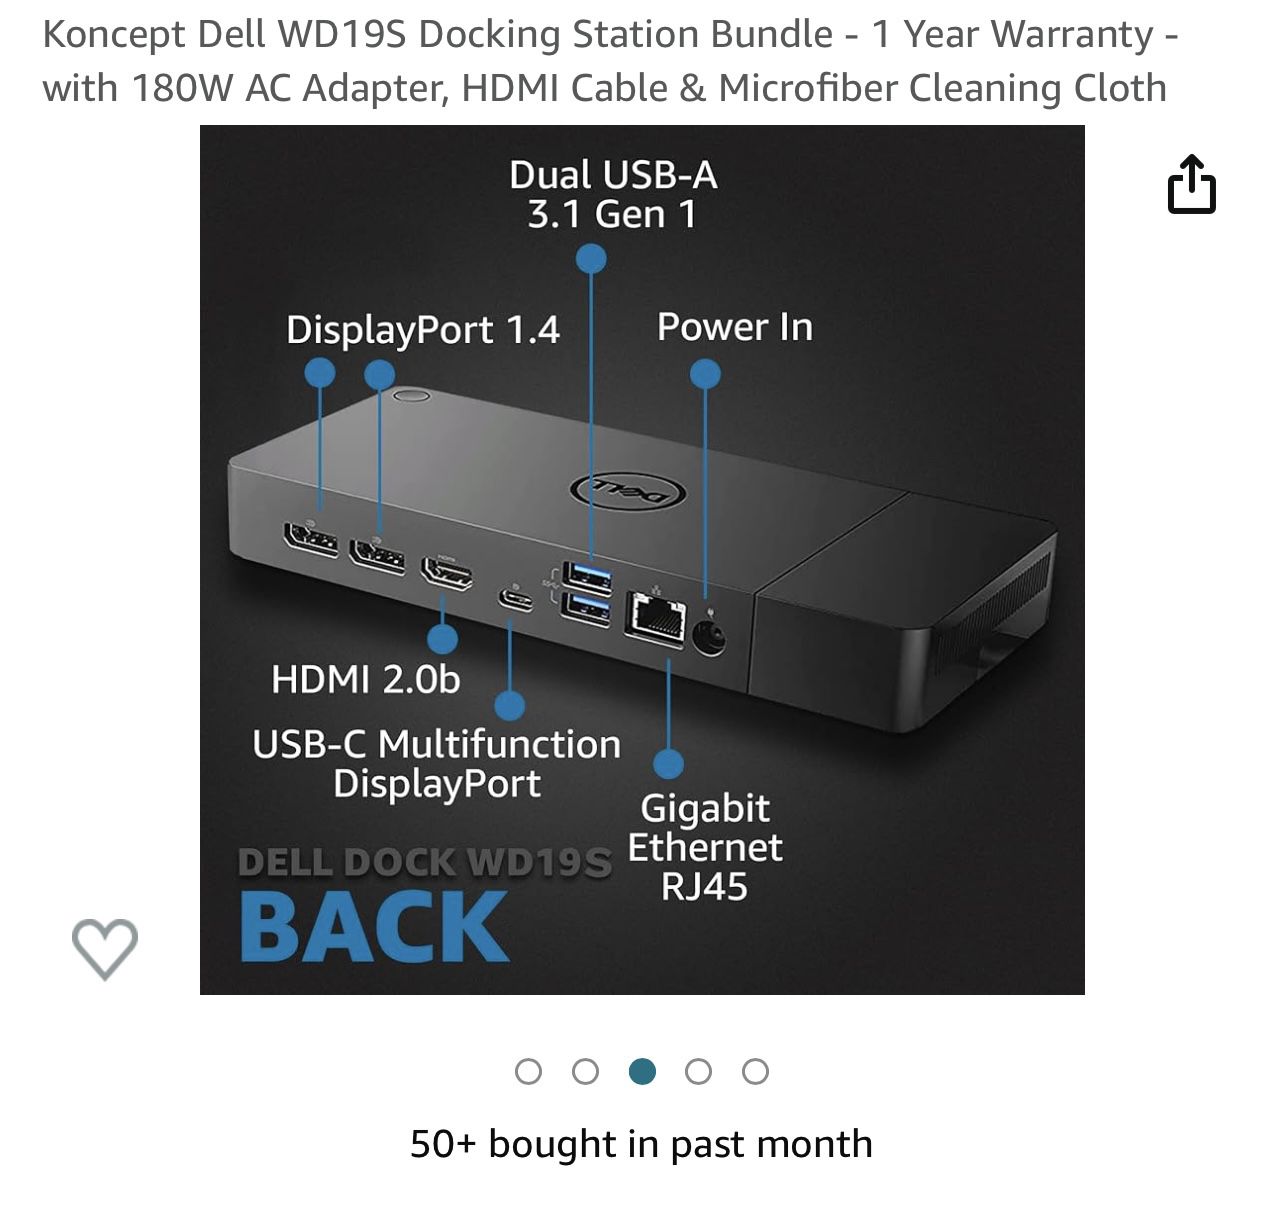 Koncept Dell WD19S Docking Station Bundle - 1 Year Warranty - with 180W AC Adapter, HDMI Cable & Microfiber Cleaning Cloth